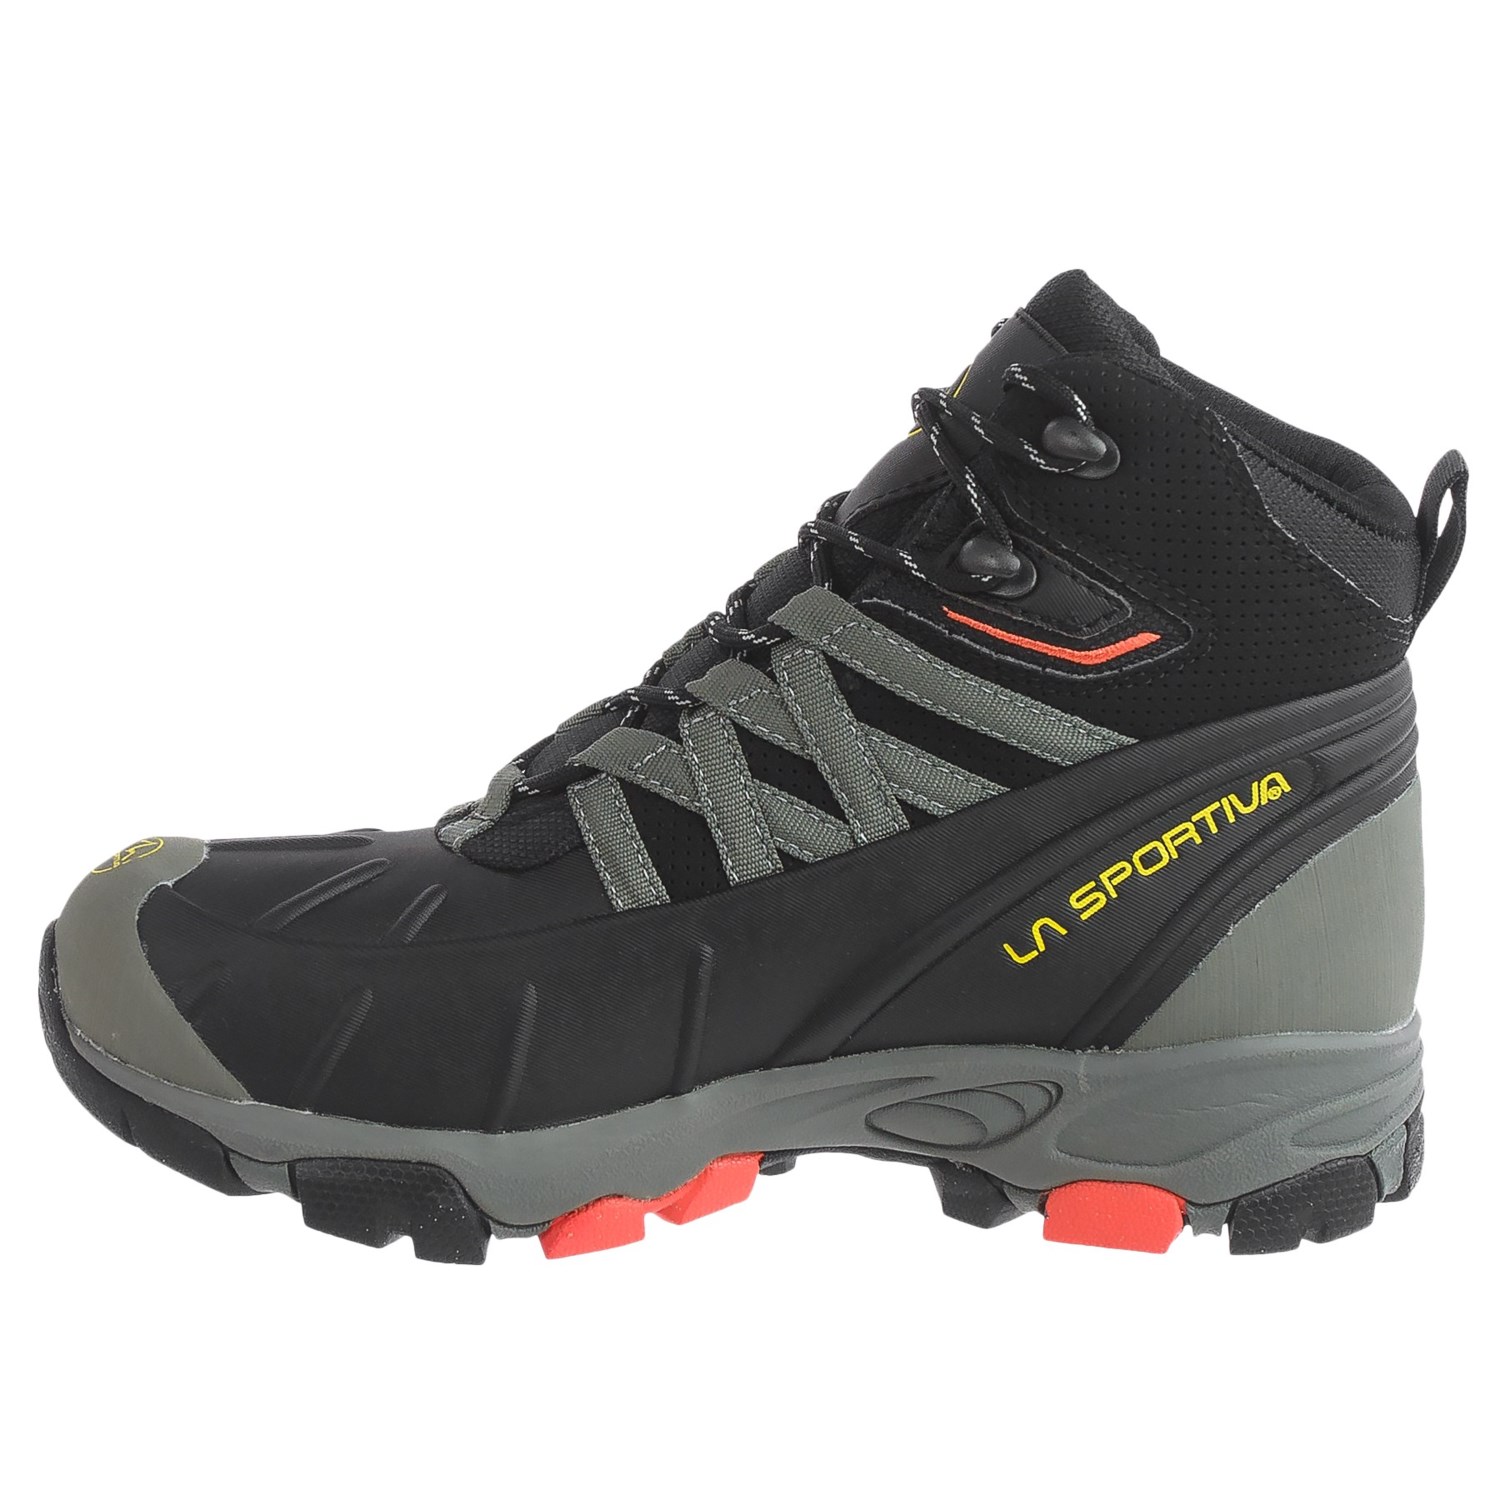 La Sportiva Frost Gore-Tex® Hiking Boots (For Women) - Save 60%